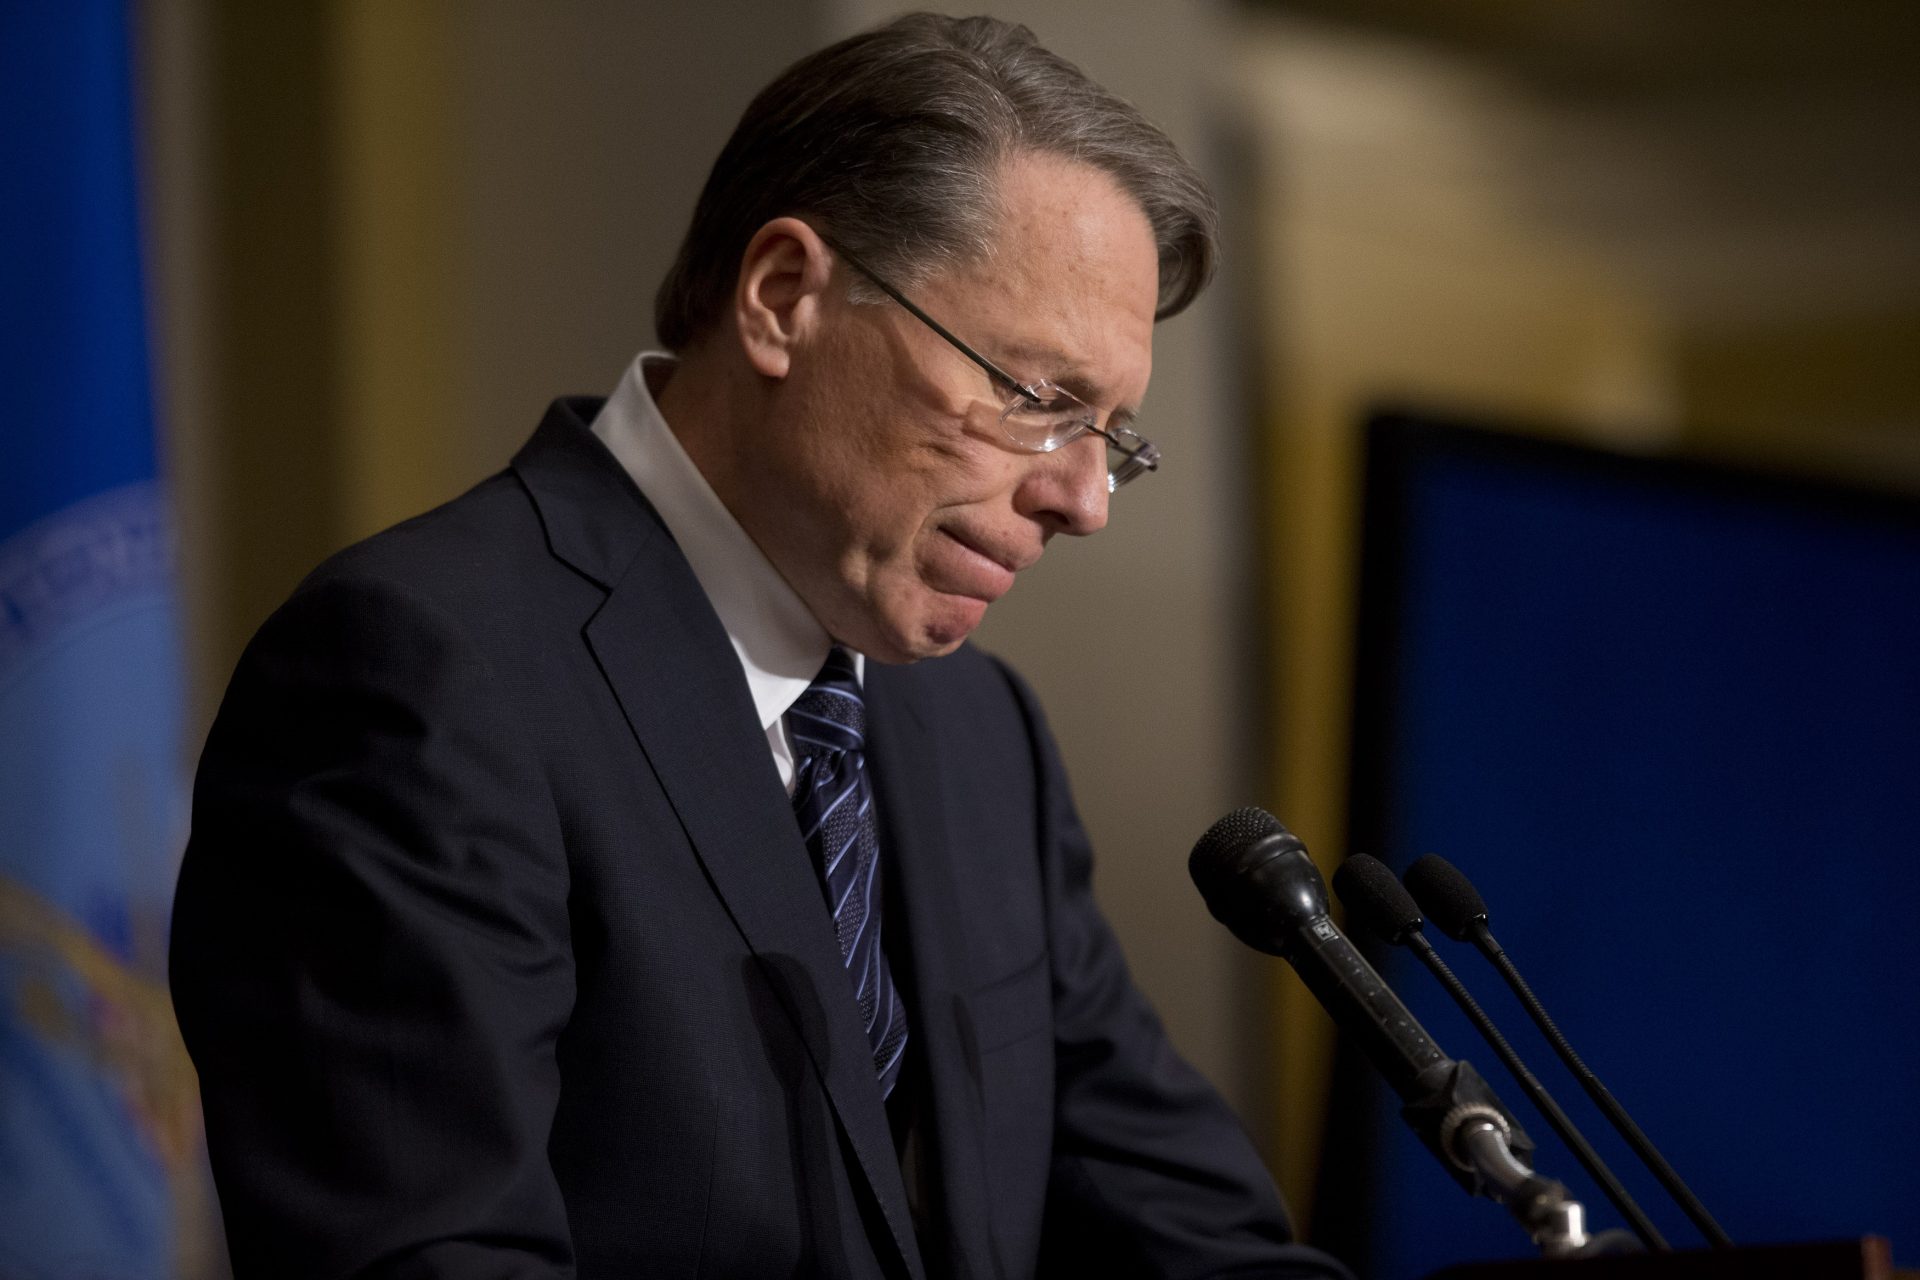 The National Rifle Association executive vice president Wayne LaPierre pauses as he makes a statement during a news conference in response to the Connecticut school shooting, on Friday, Dec. 21, 2012 in Washington. The National Rifle Association broke its silence Friday on last week's shooting rampage at a Connecticut elementary school that left 26 children and staff dead.